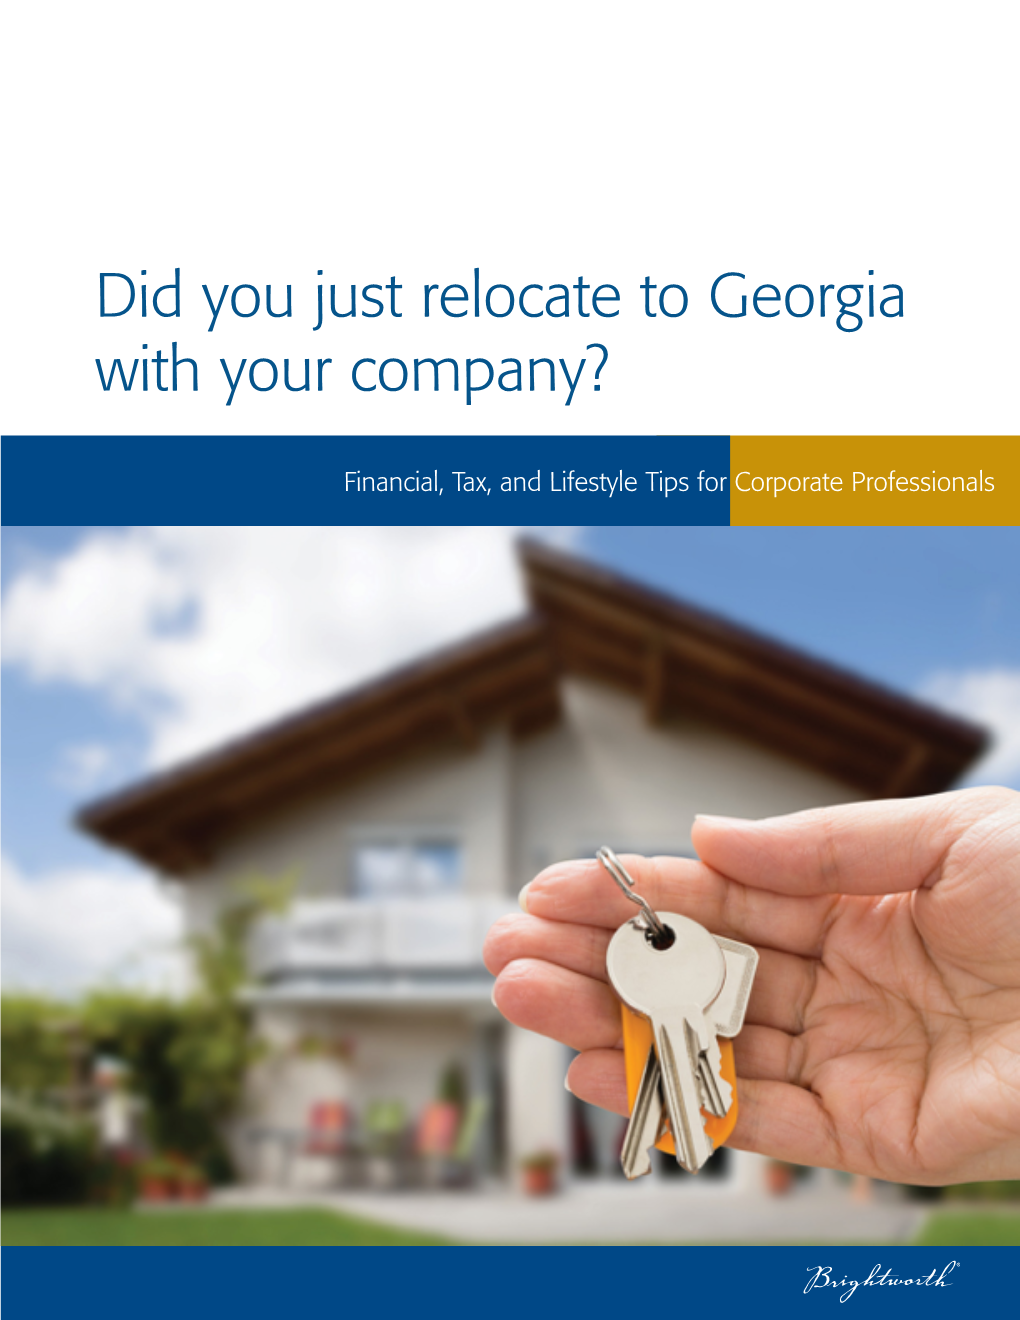 Did You Just Relocate to Georgia with Your Company?